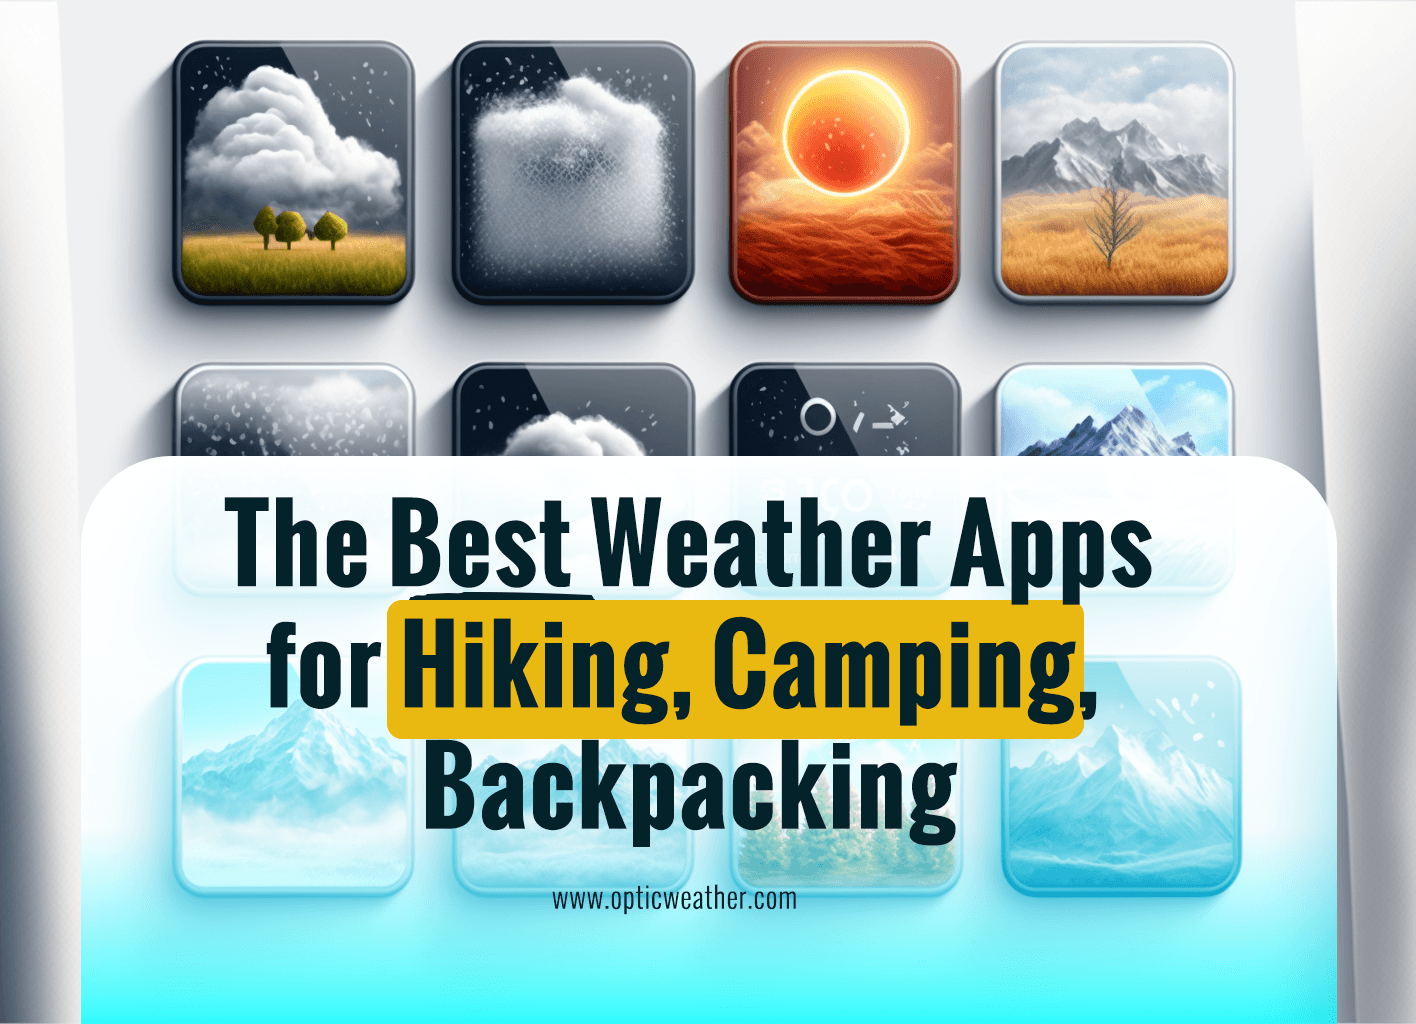 The Best Weather Apps for Hiking, Camping, and Backpacking